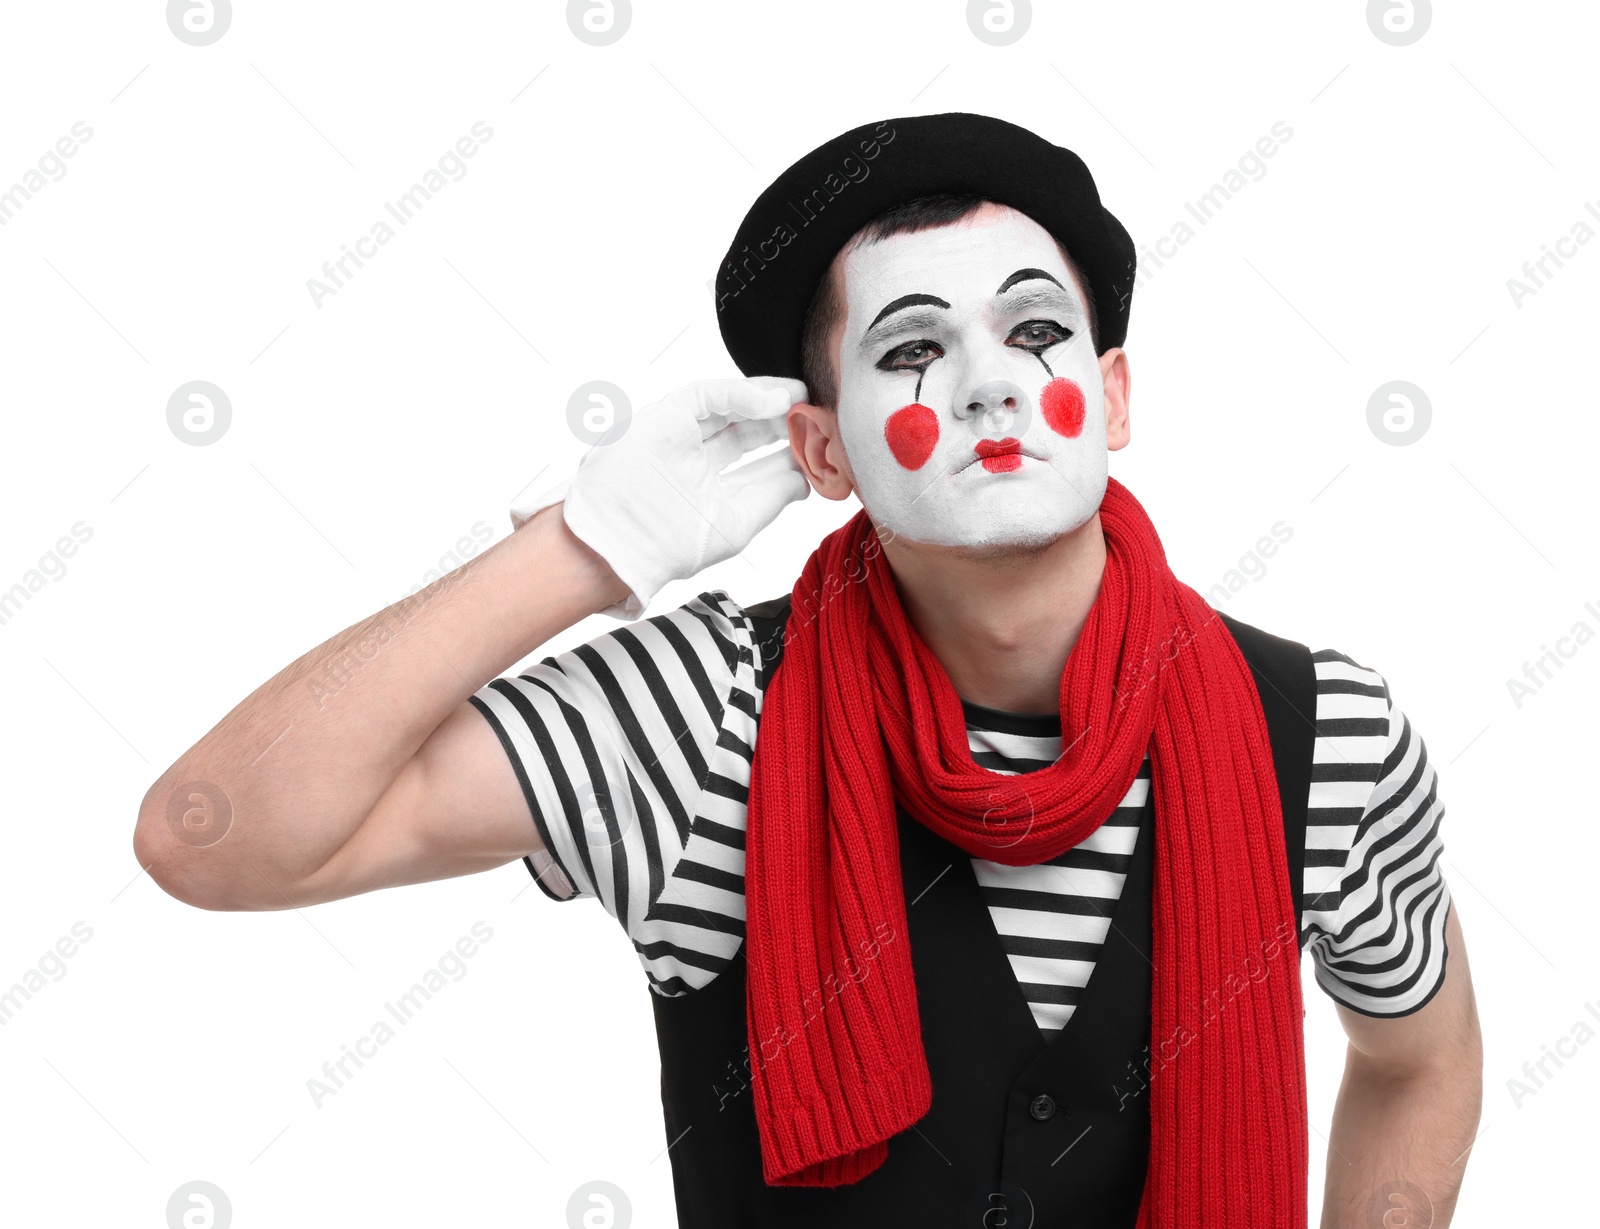 Photo of Mime artist showing hand to ear gesture on white background